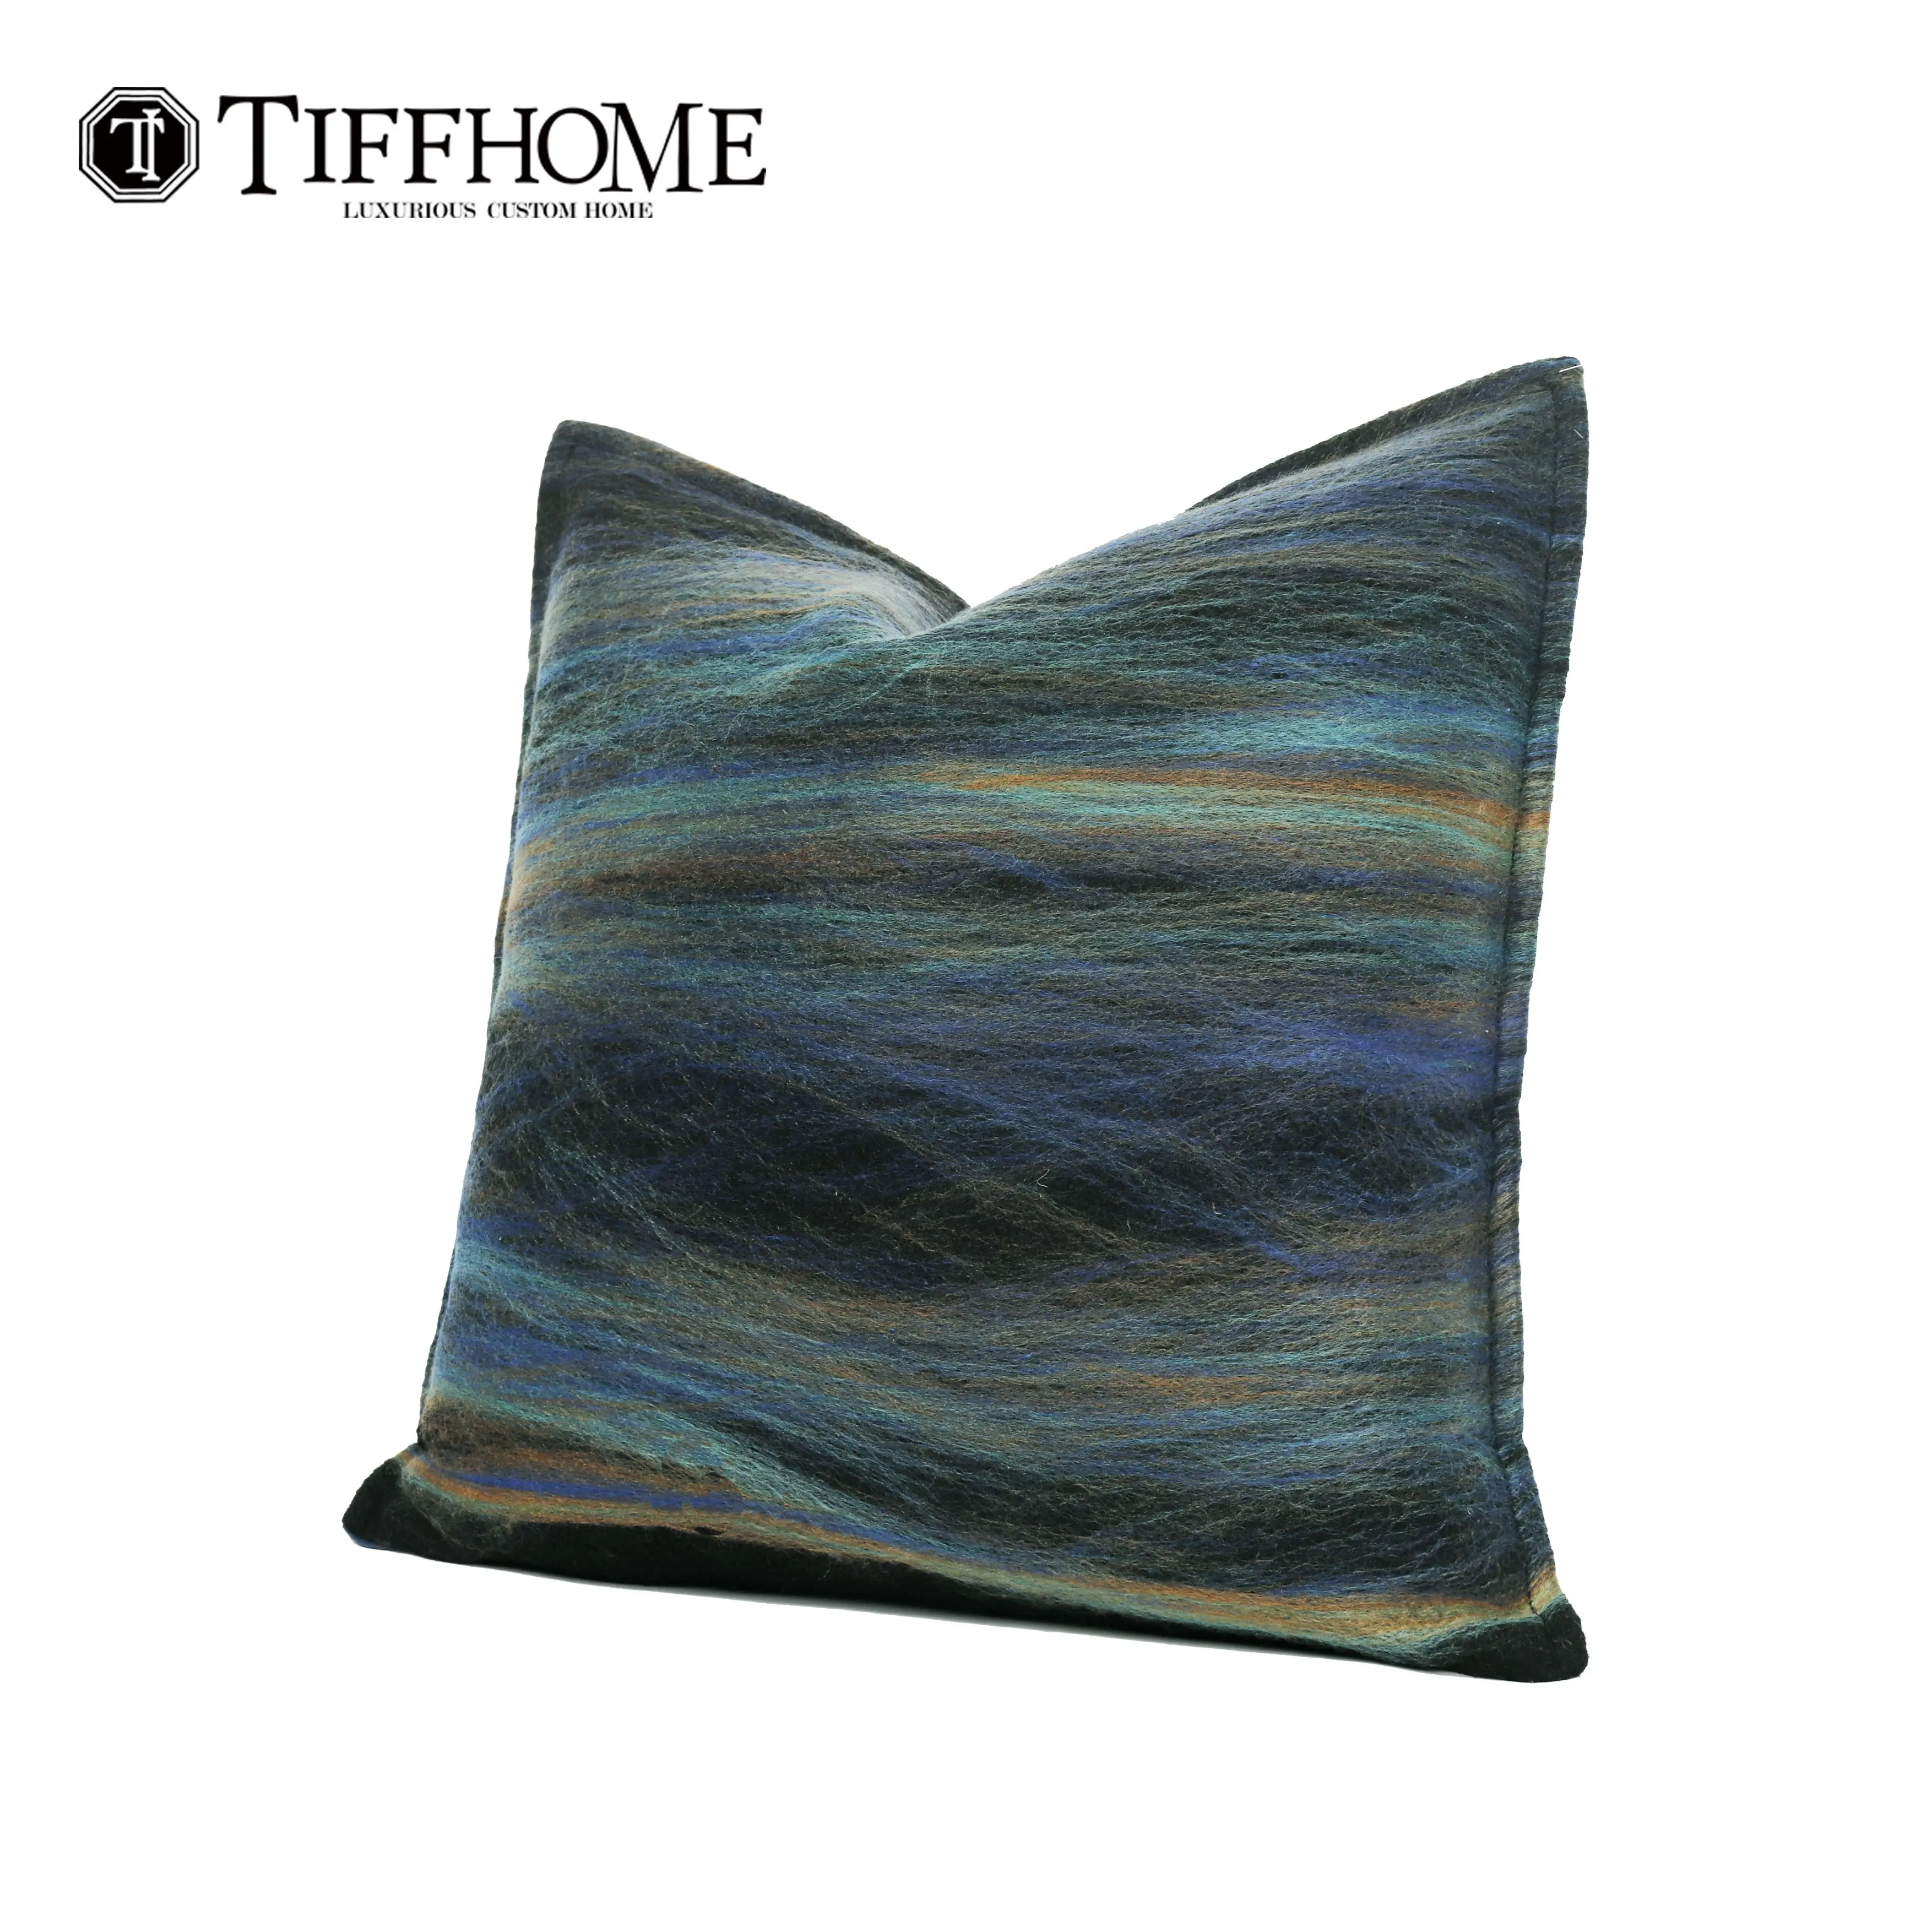 Tiff Home Best Selling 45*45cm Wholesale Luxury Throw Pillow Reusable Gradient Cushion Cover For Living Room Sofa